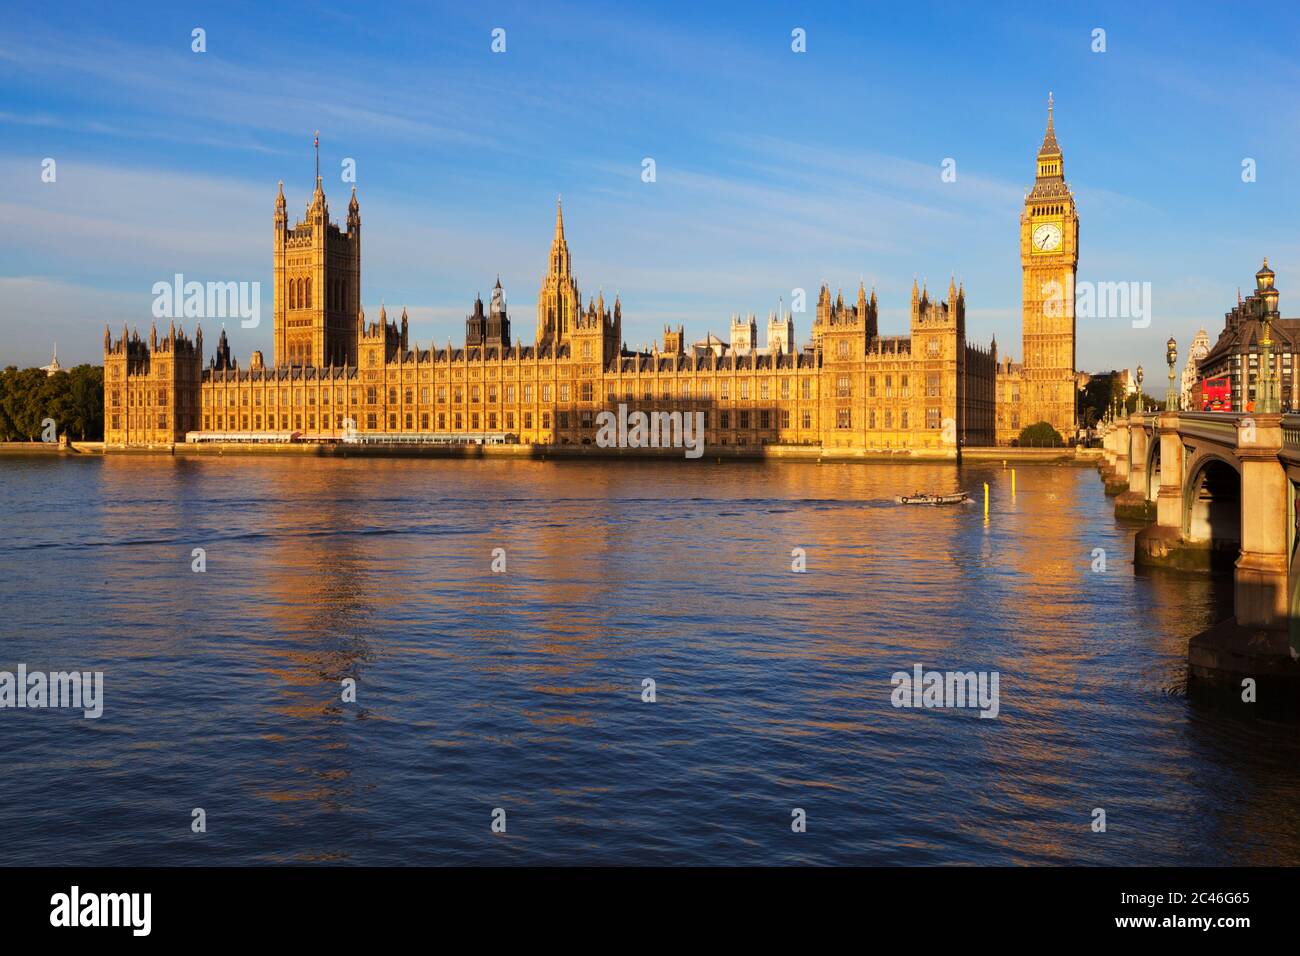 View over River Thames to Houses of Parliament and Big Ben, London, England, United Kingdom, Europe Stock Photo